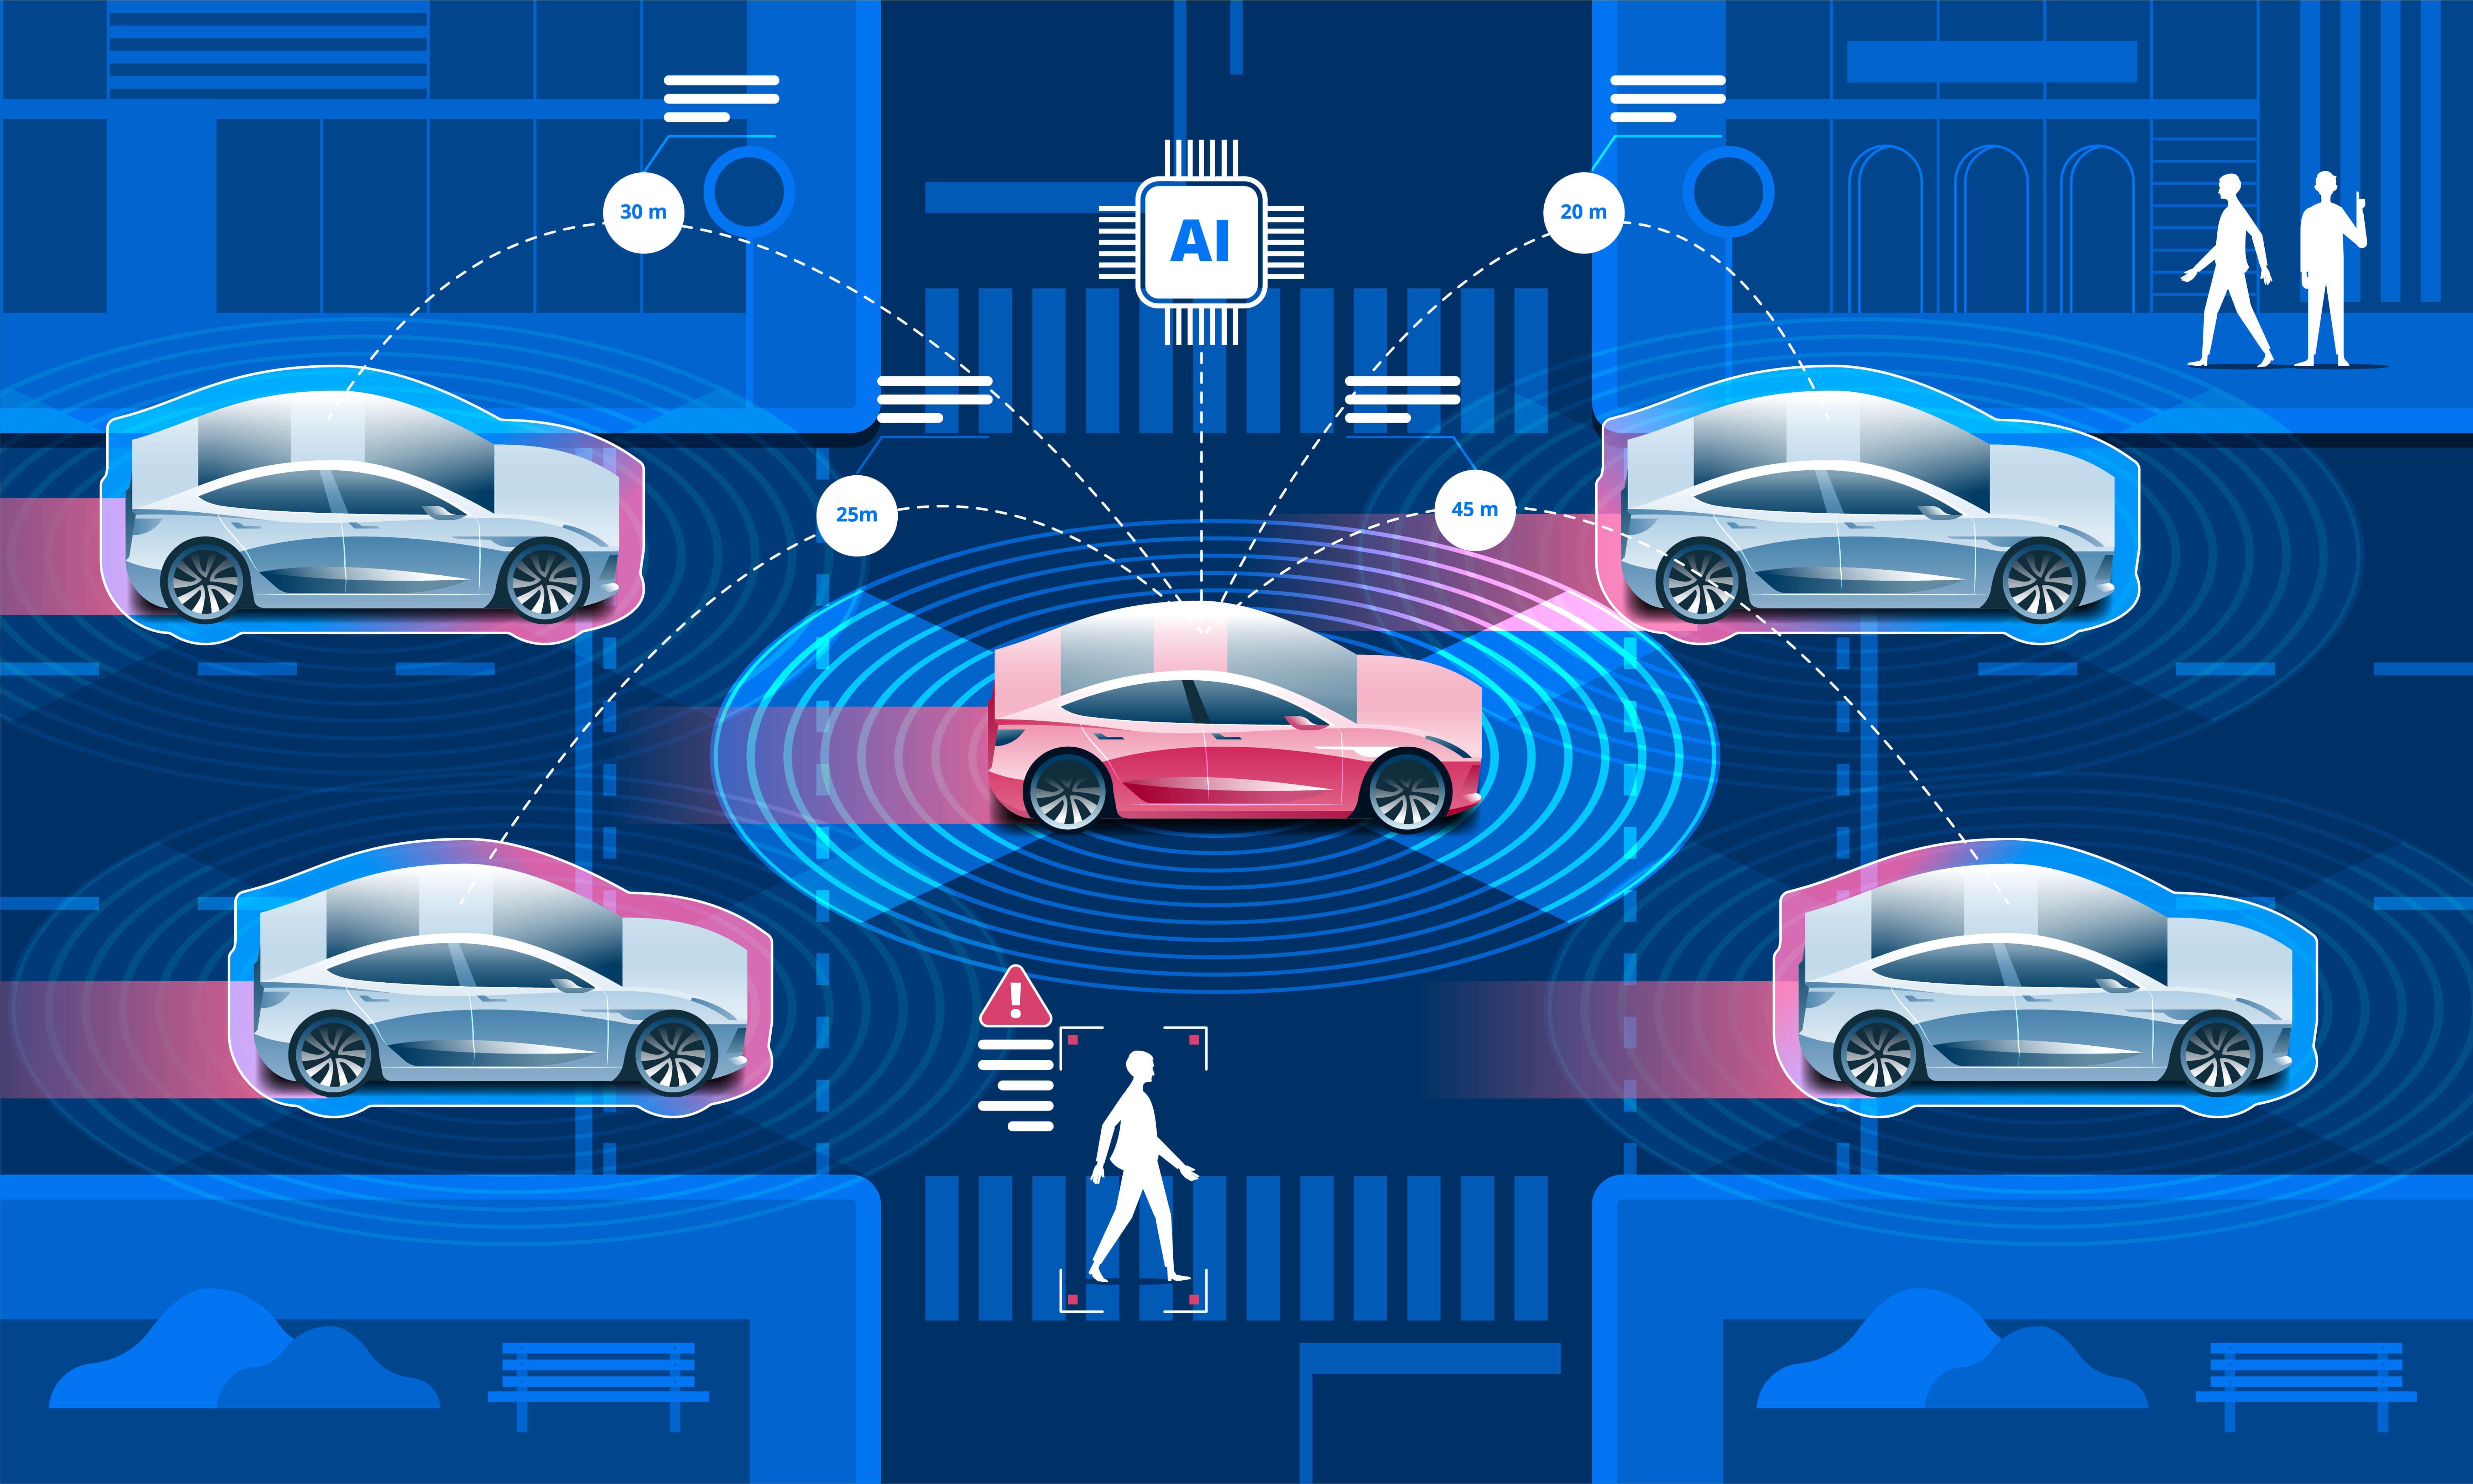 IoT will be crucial in autonomous vehicle communication.